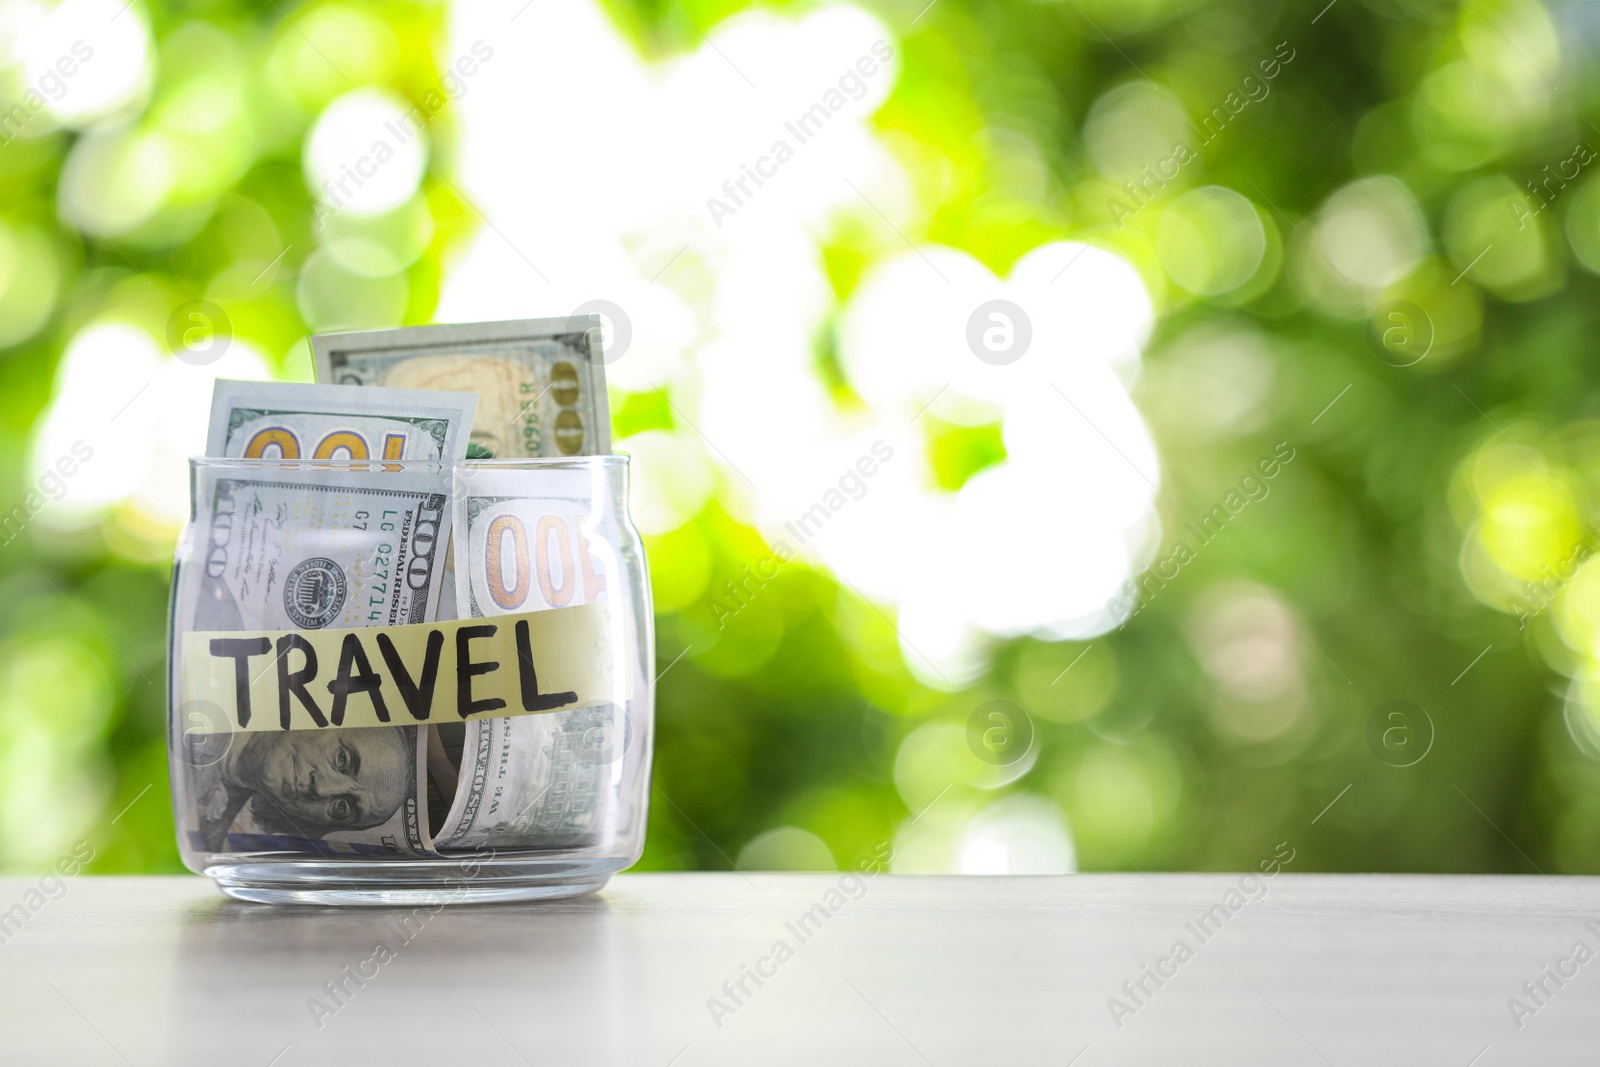 Photo of Glass jar with money and label TRAVEL on table against blurred background. Space for text